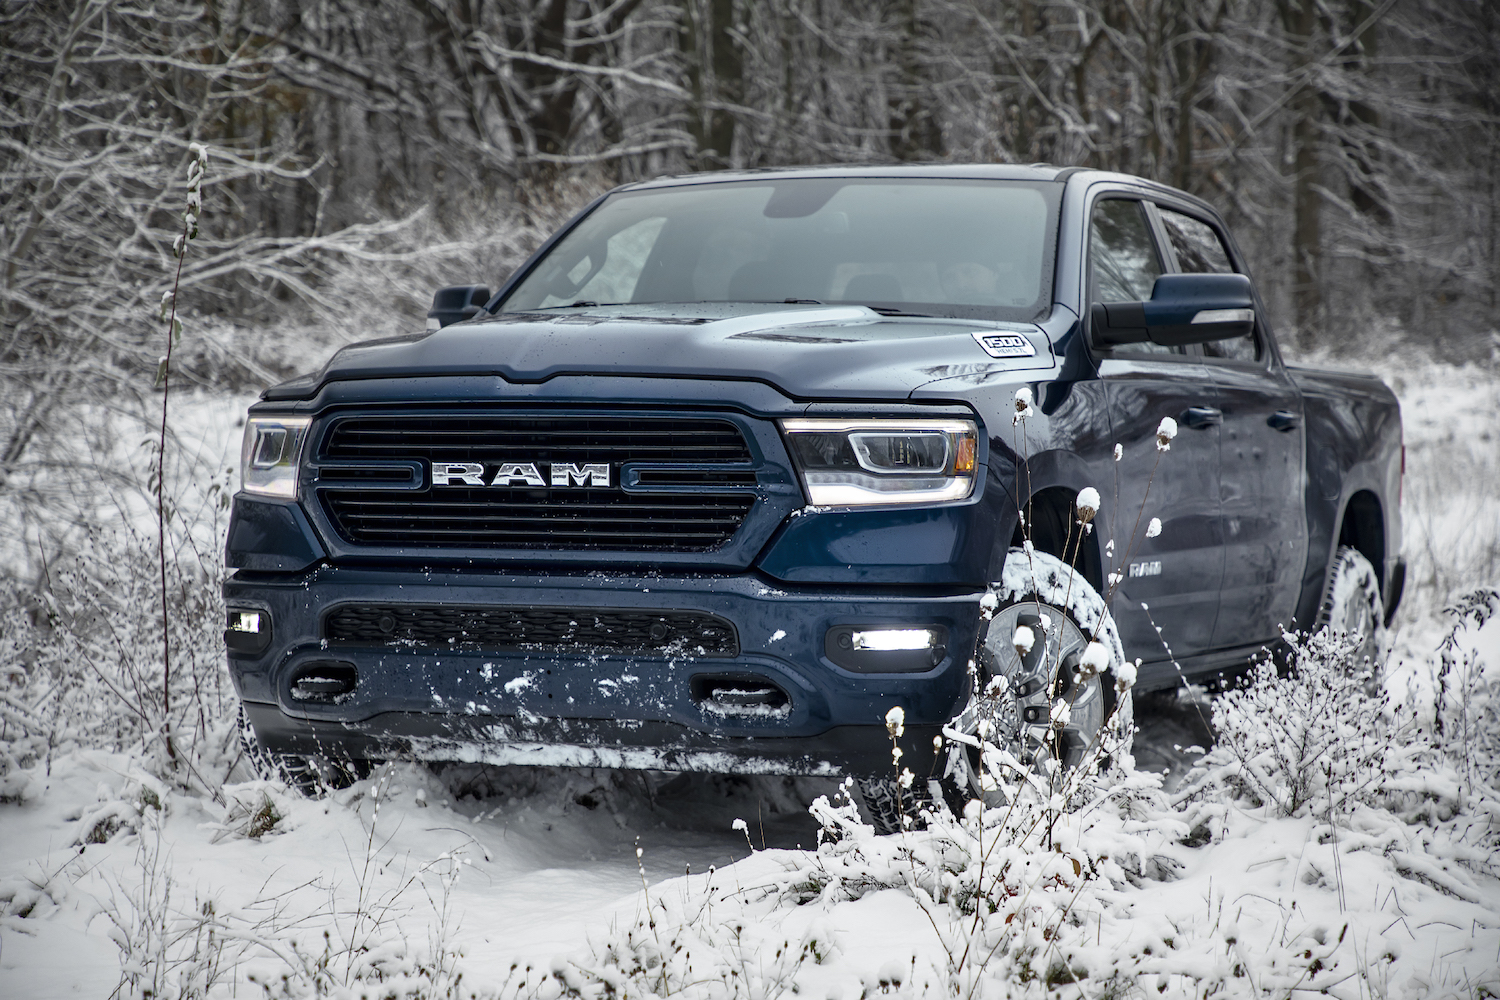 Blue Ram 1500 truck parked in the middle of snowy woods.